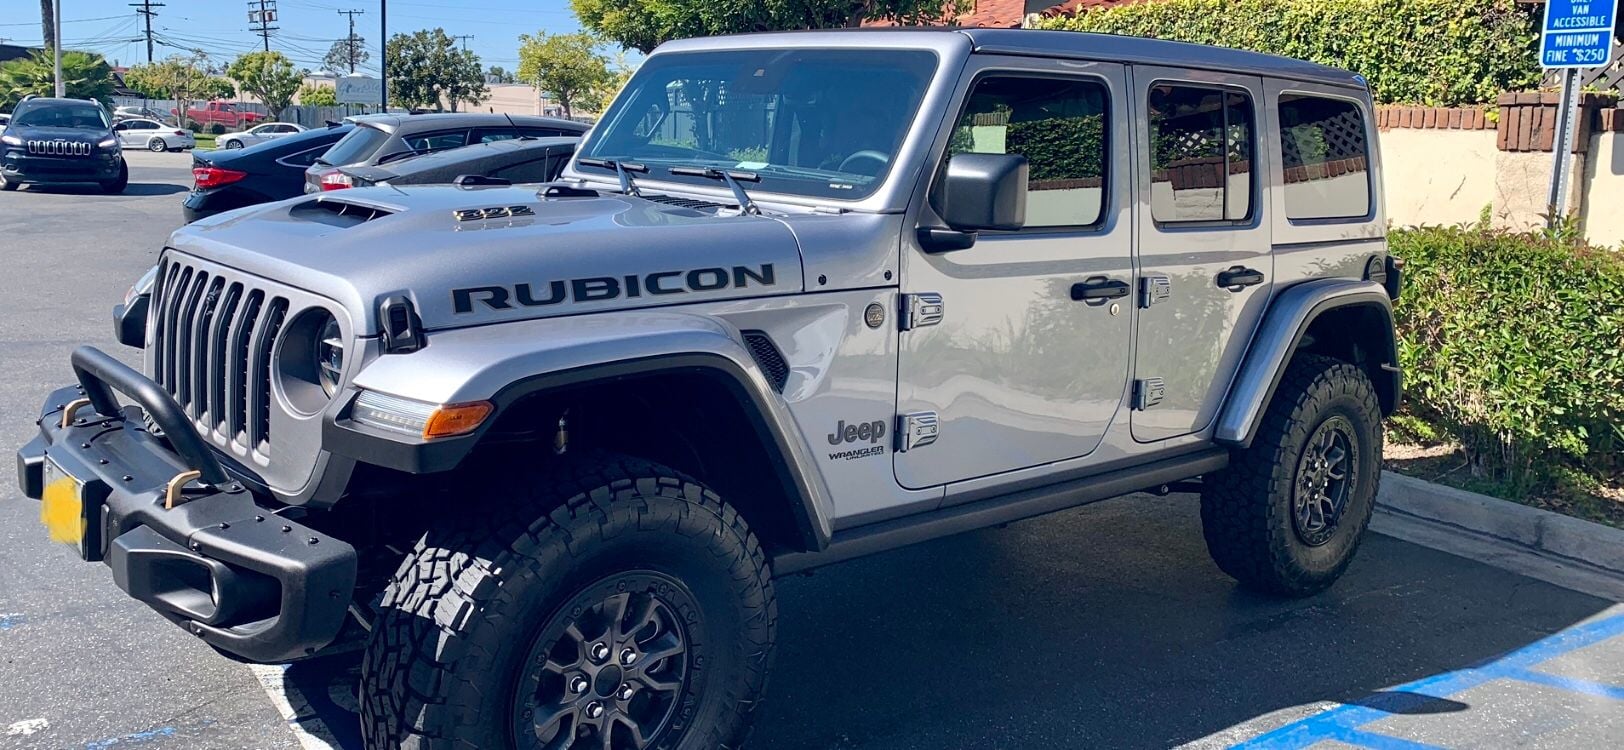 2020 g63 owner bought a 2021 Jeep rubicon 392  Forums